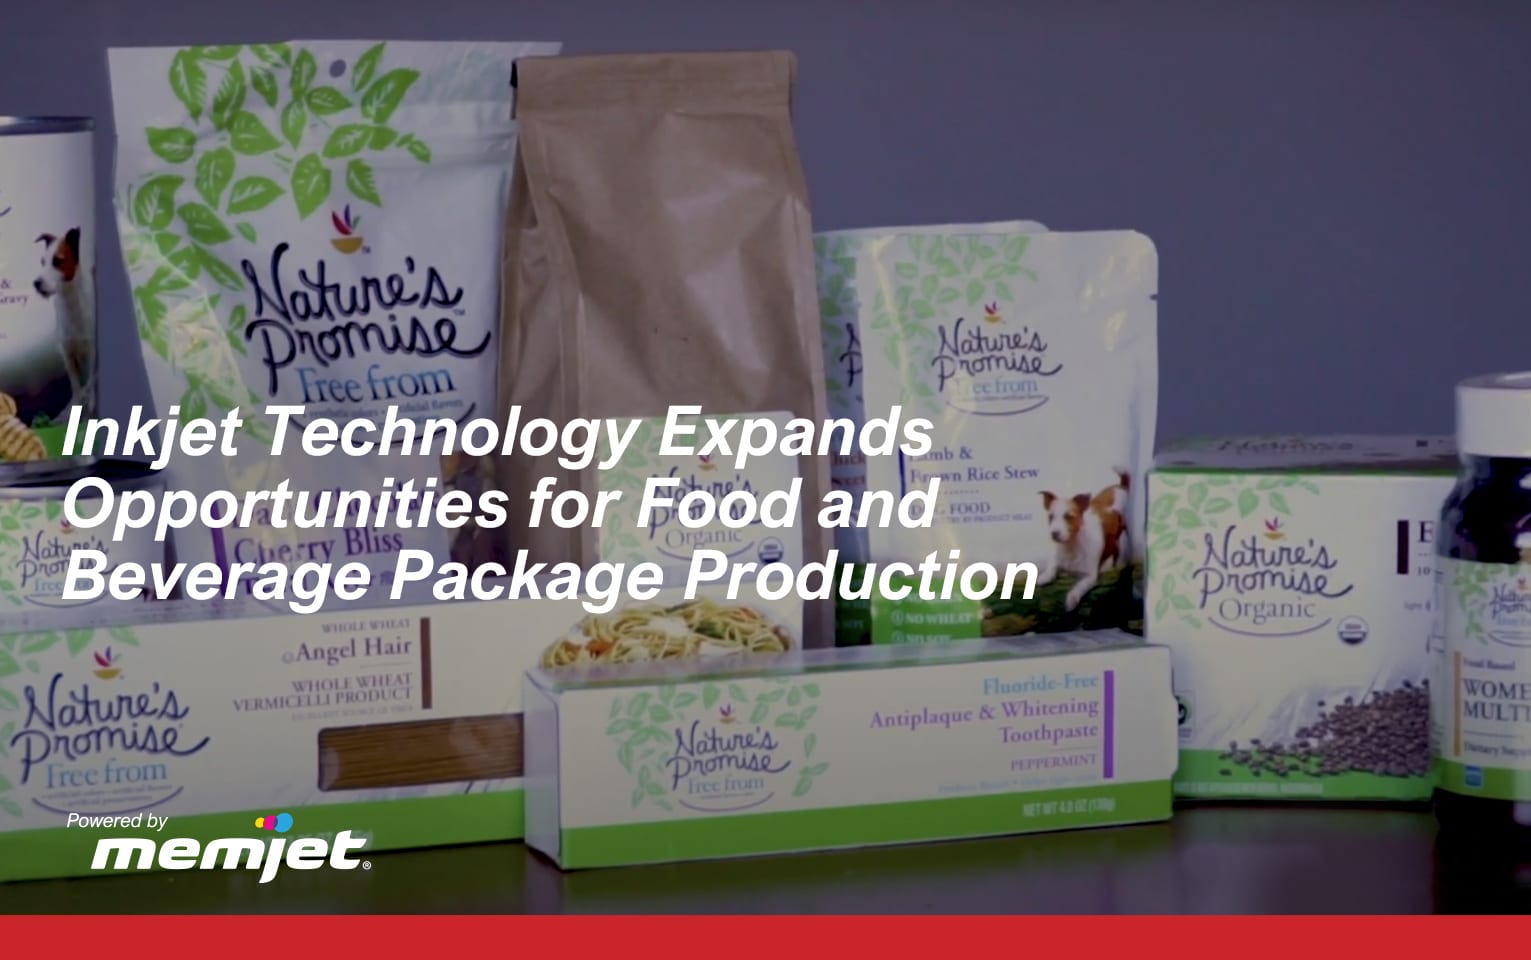 Inkjet Technology Expands Opportunities for Food and Beverage Package Production